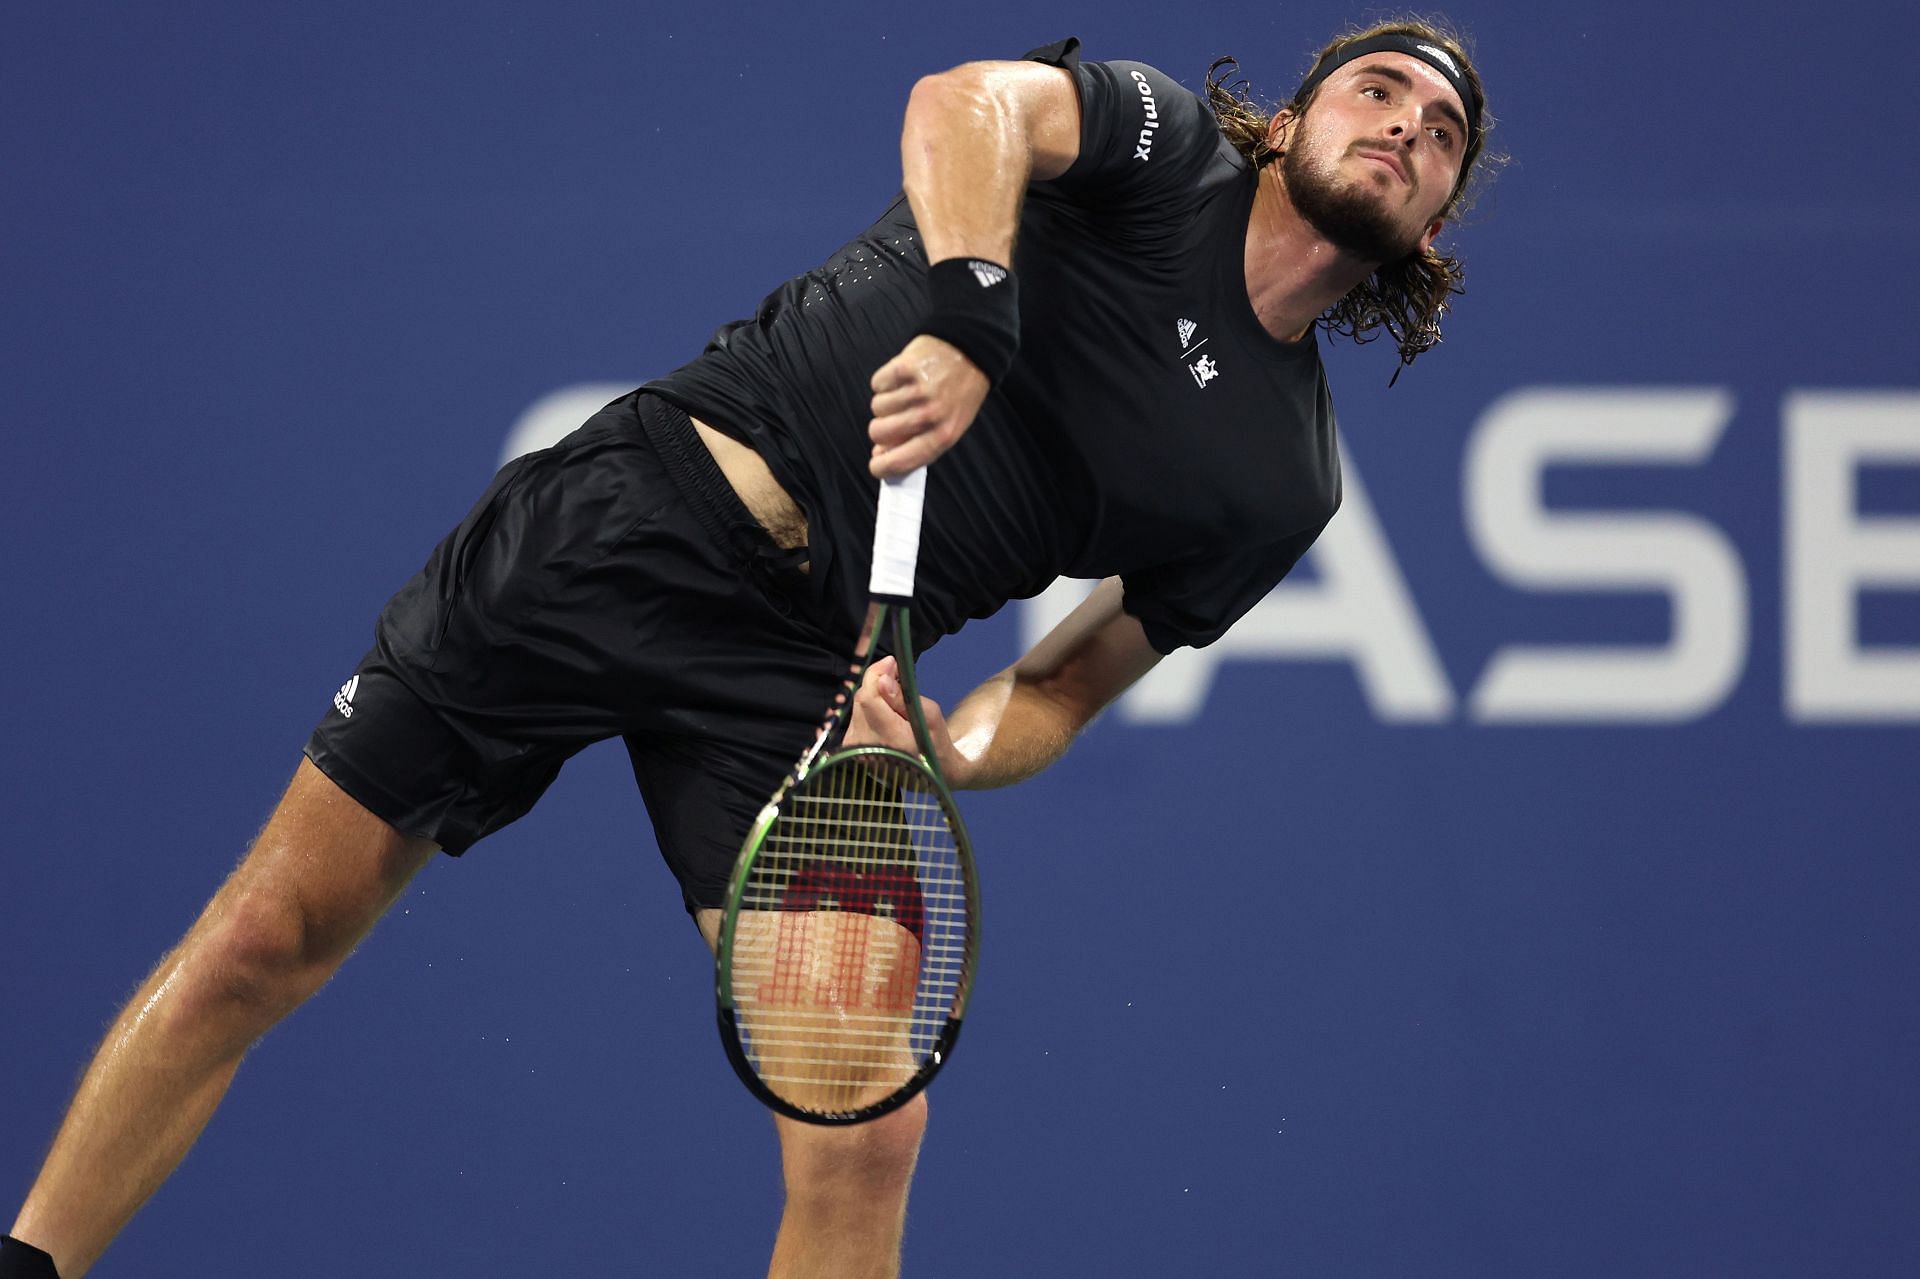 Stockholm Open 2022 Stefanos Tsitsipas vs Mikael Ymer preview, head-to-head, prediction, odds and pick